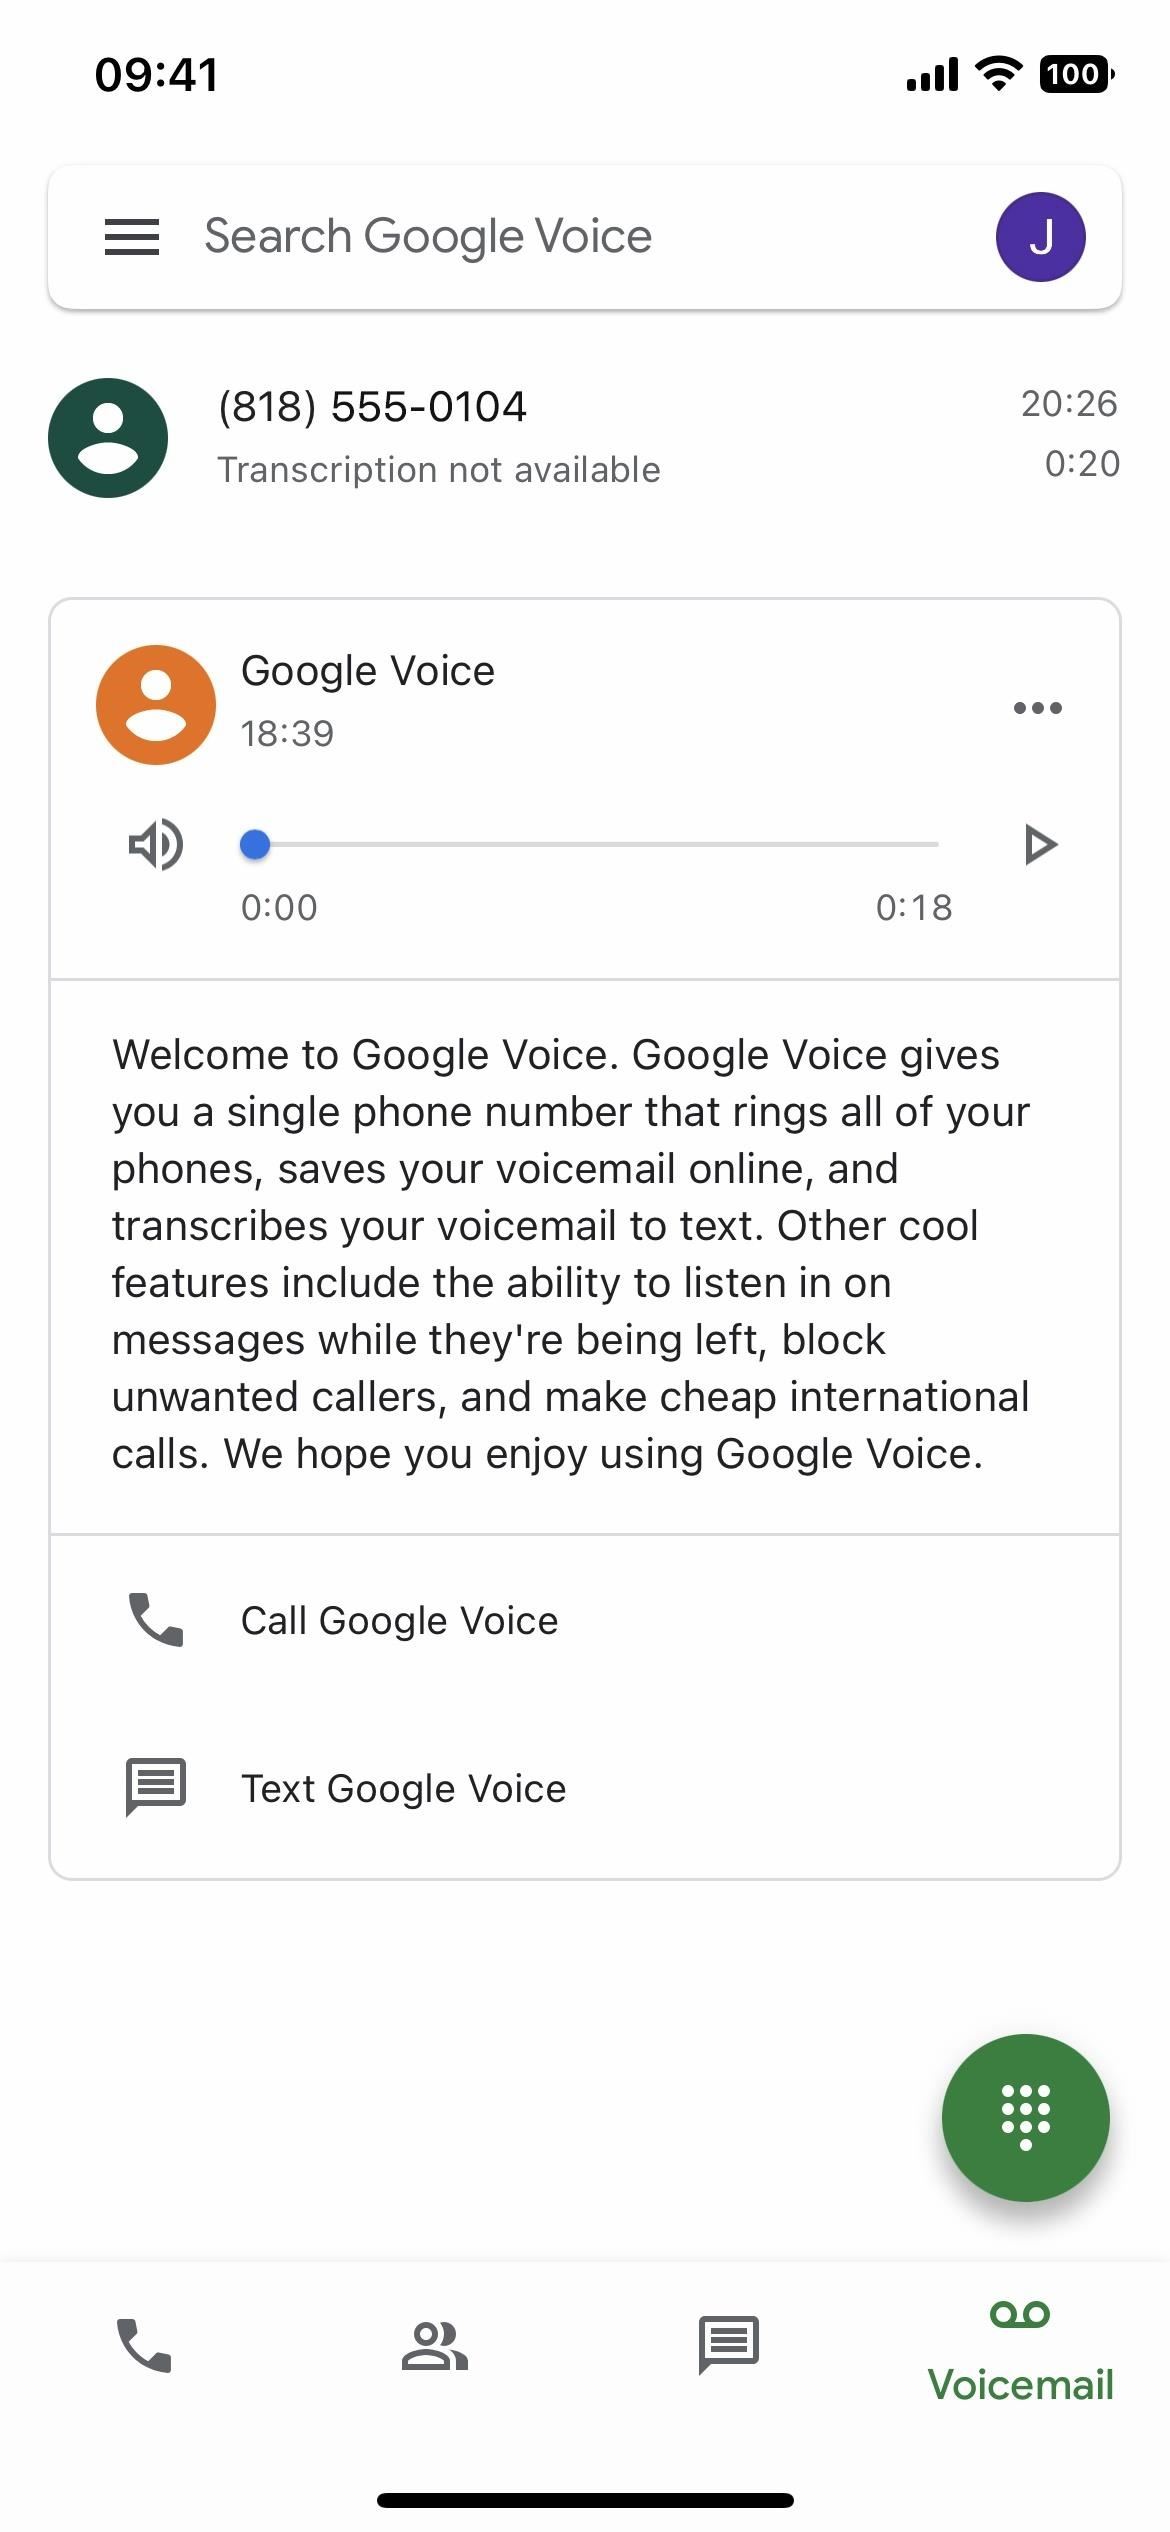 Is Google Voice really free?